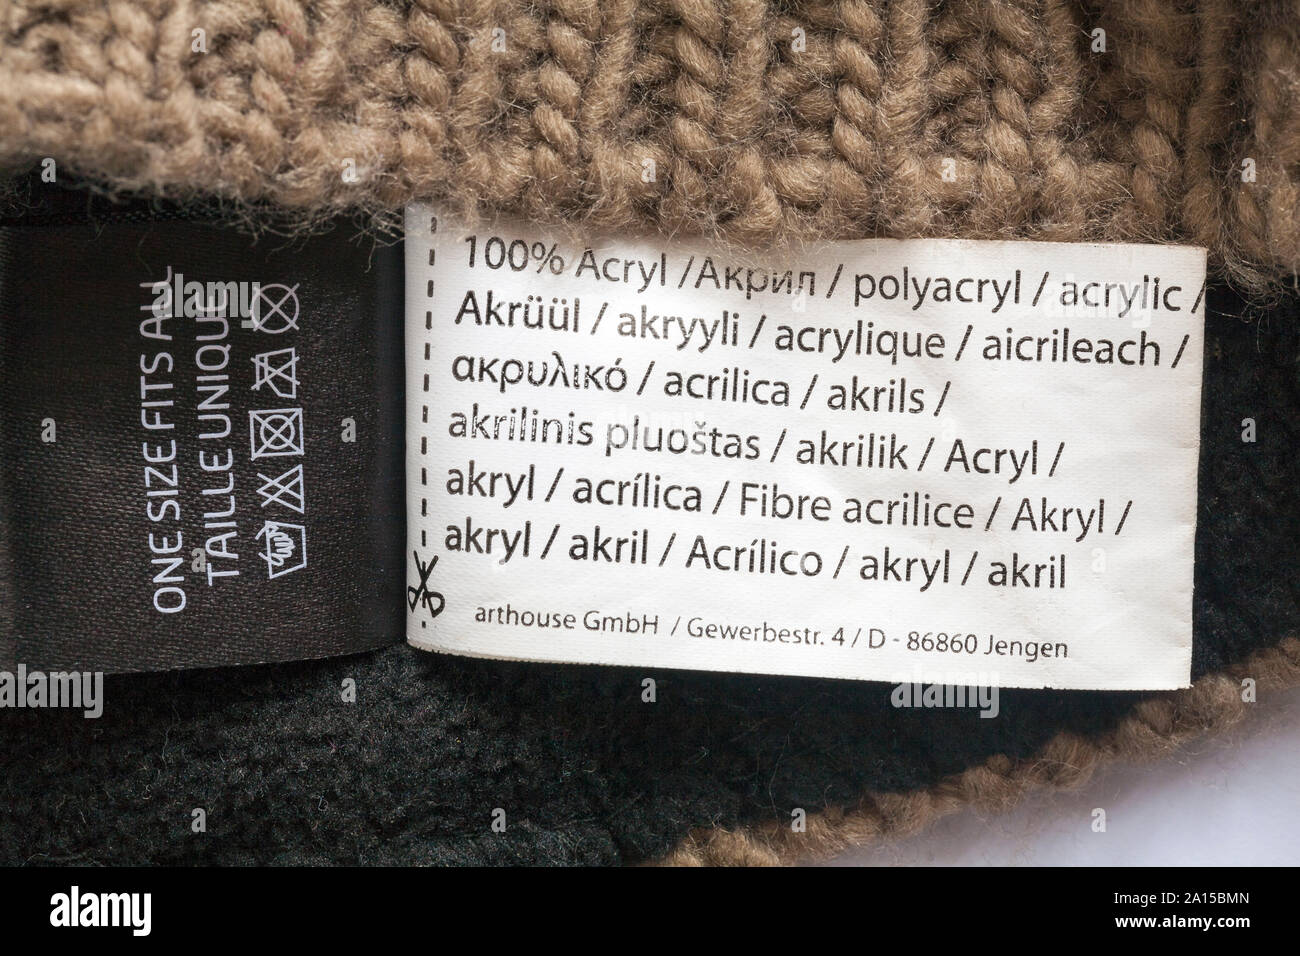 petticoat Harden Aboard 100% acrylic in many different languages on label in hat one size fits all  Stock Photo - Alamy